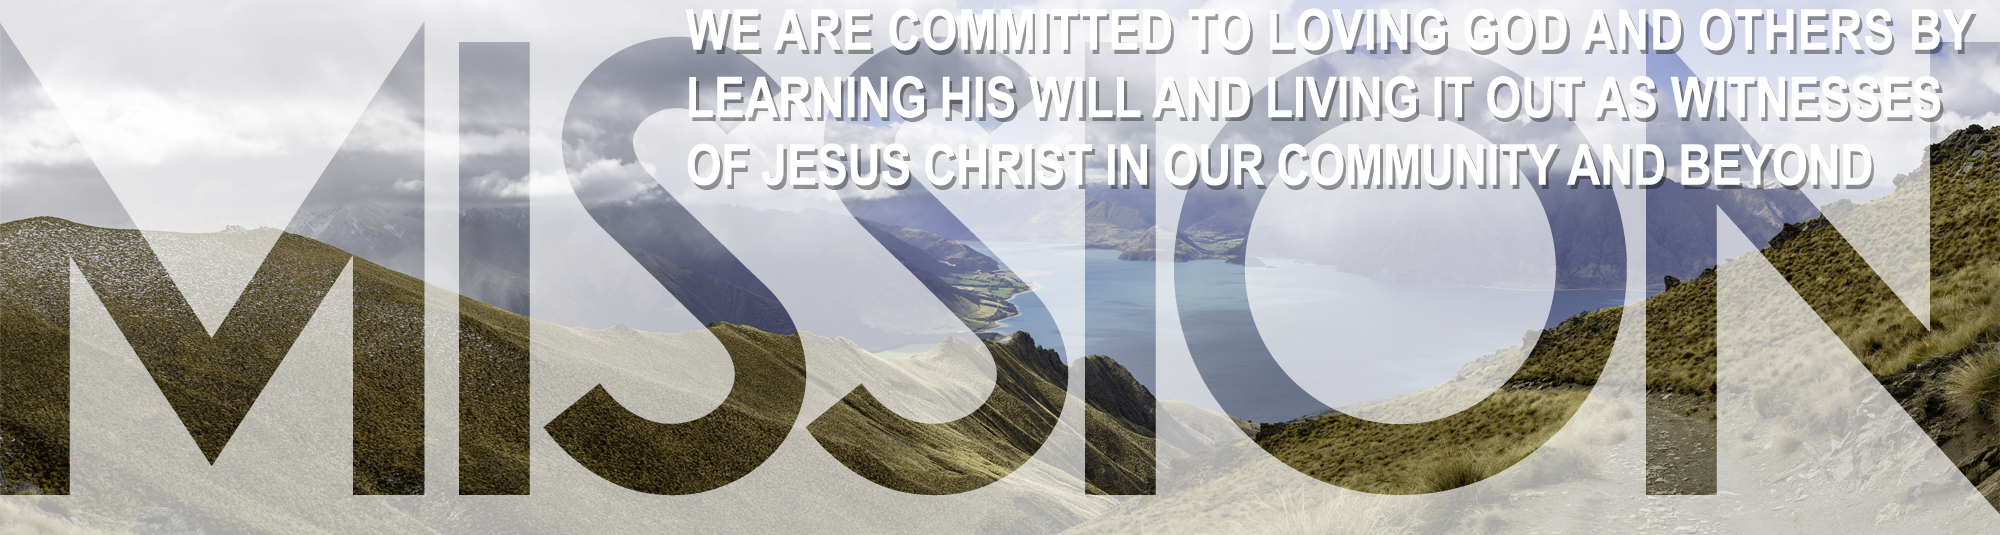 Mission Statement: We are committed to Loving God and others by Learning His will and Living it out as witnesses of Jesus Christ in our community and beyond